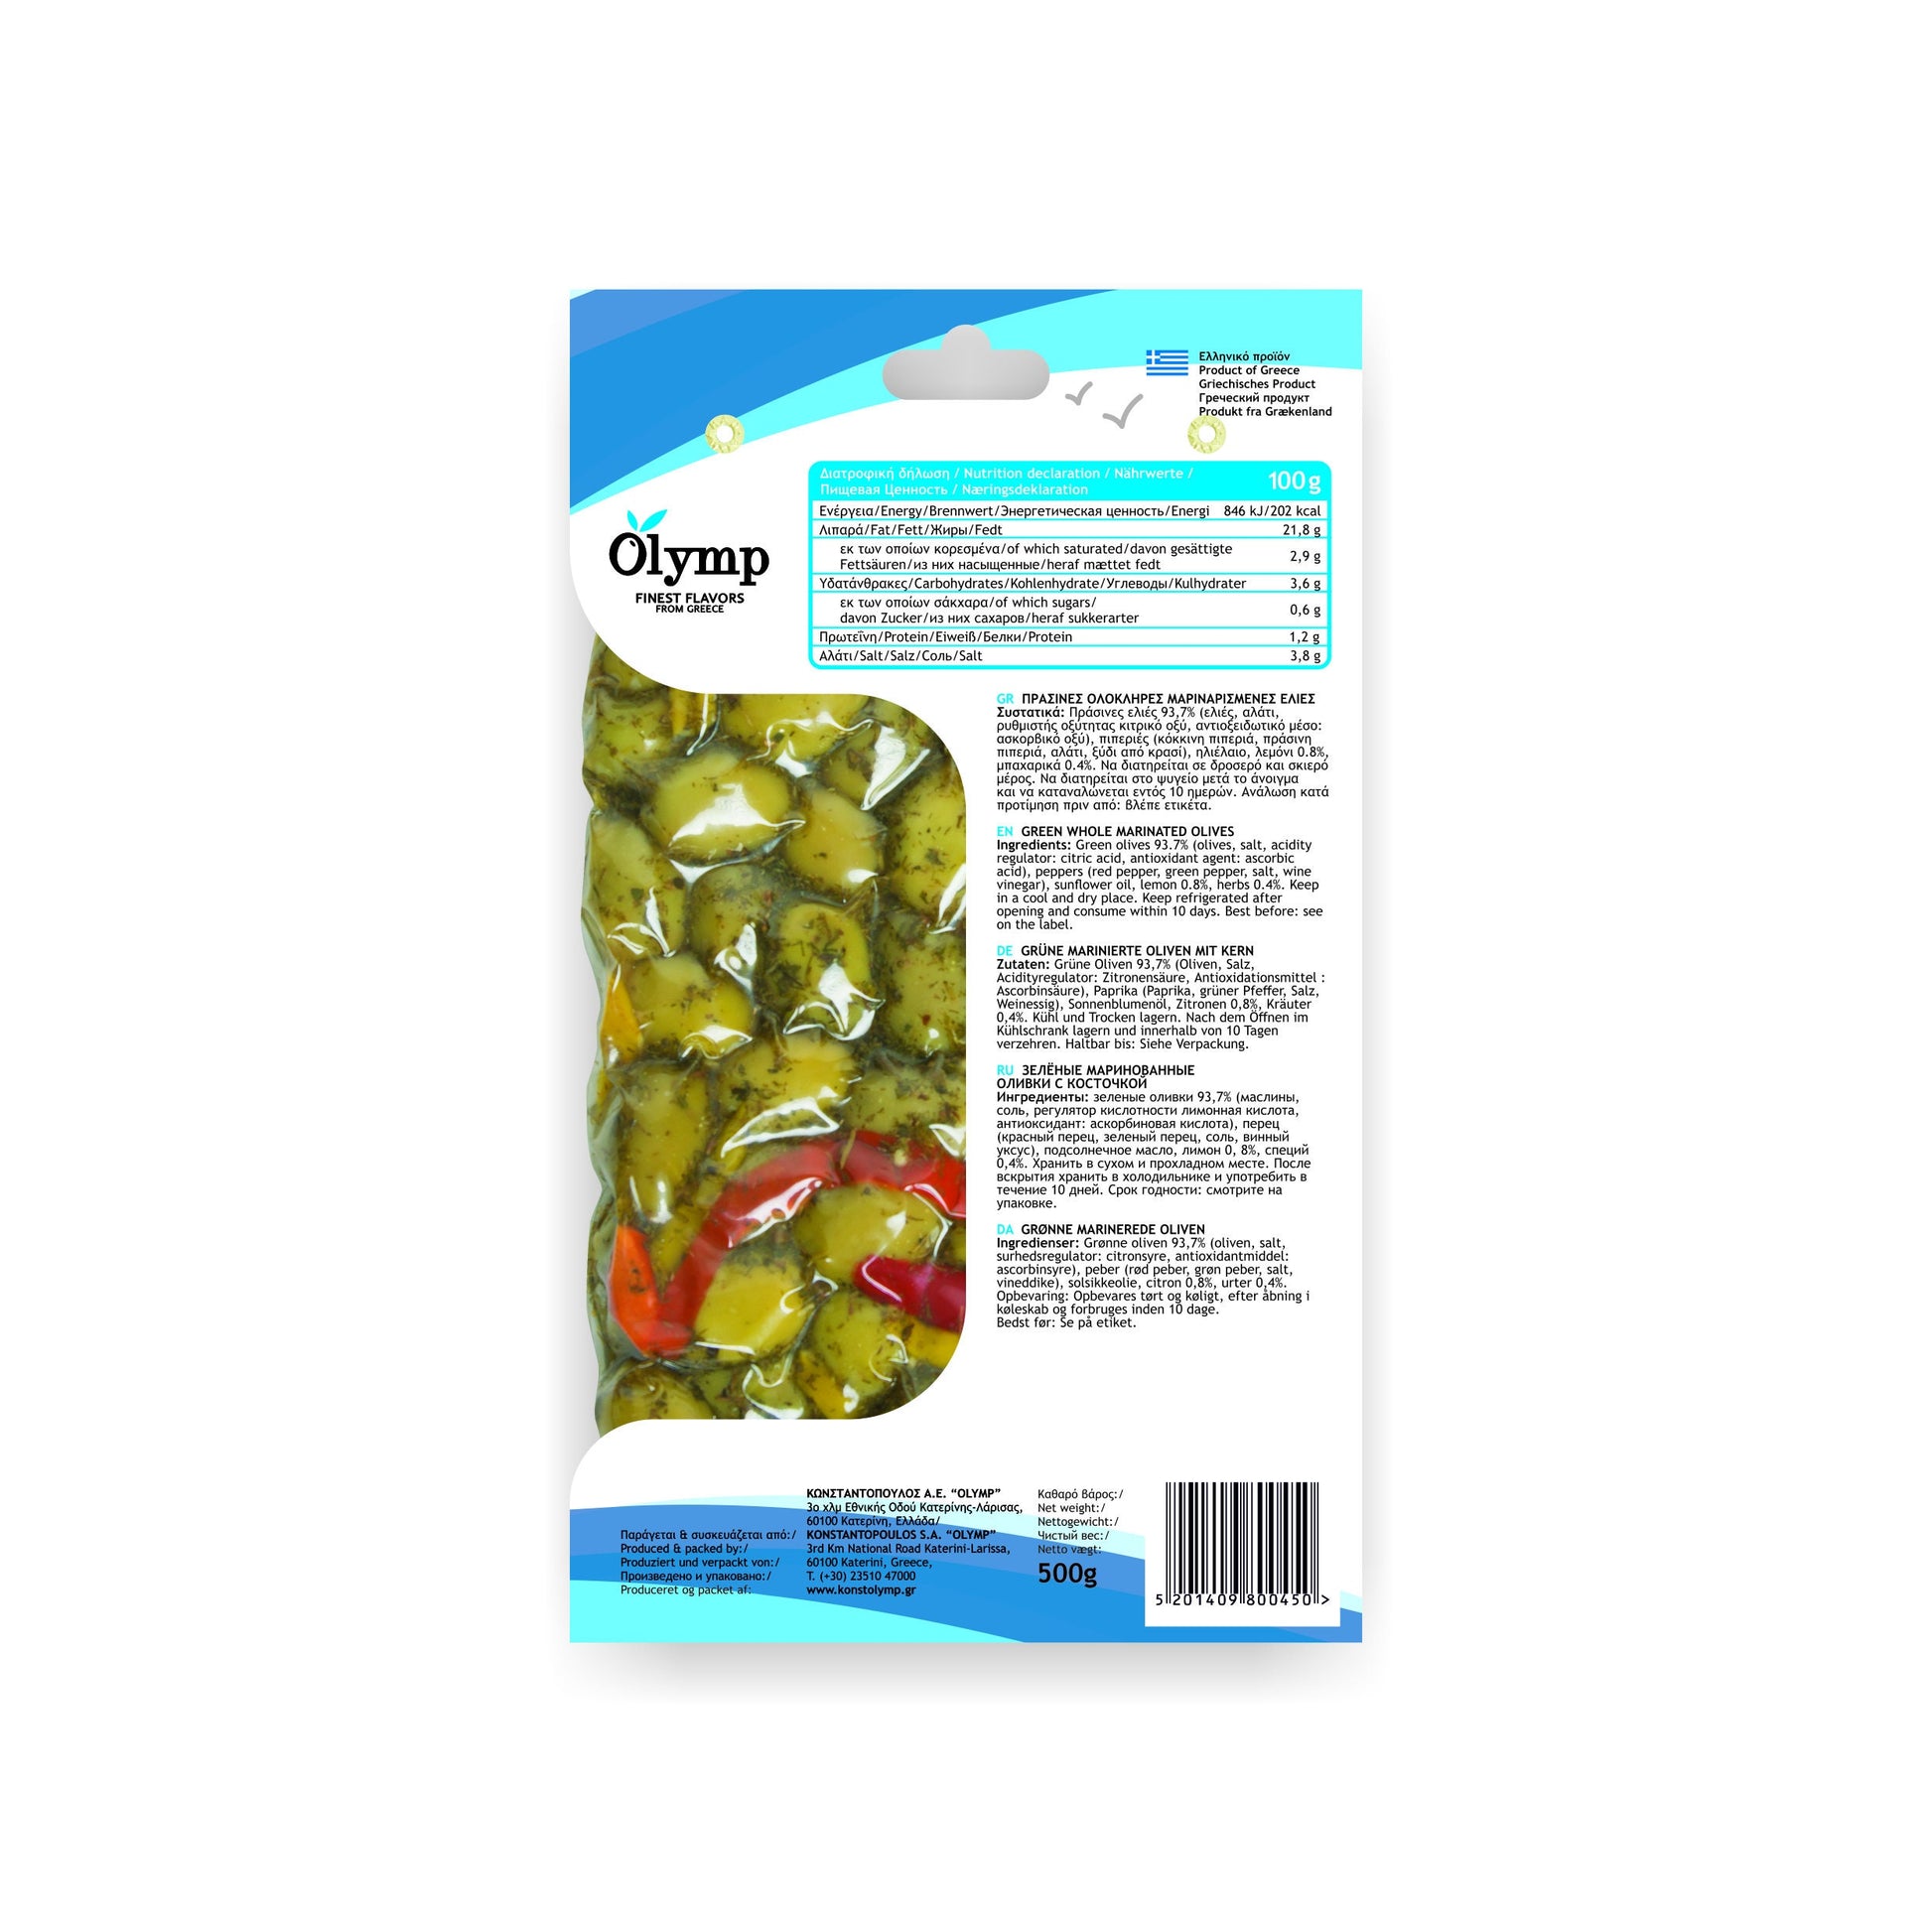 Greek Olives Vacuum bag Superior Quality Handpicked Olives from Chalkidiki Kalamata & Amfissa w/ Extra Virgin Olive Oil spices and herbs TheHolyArt